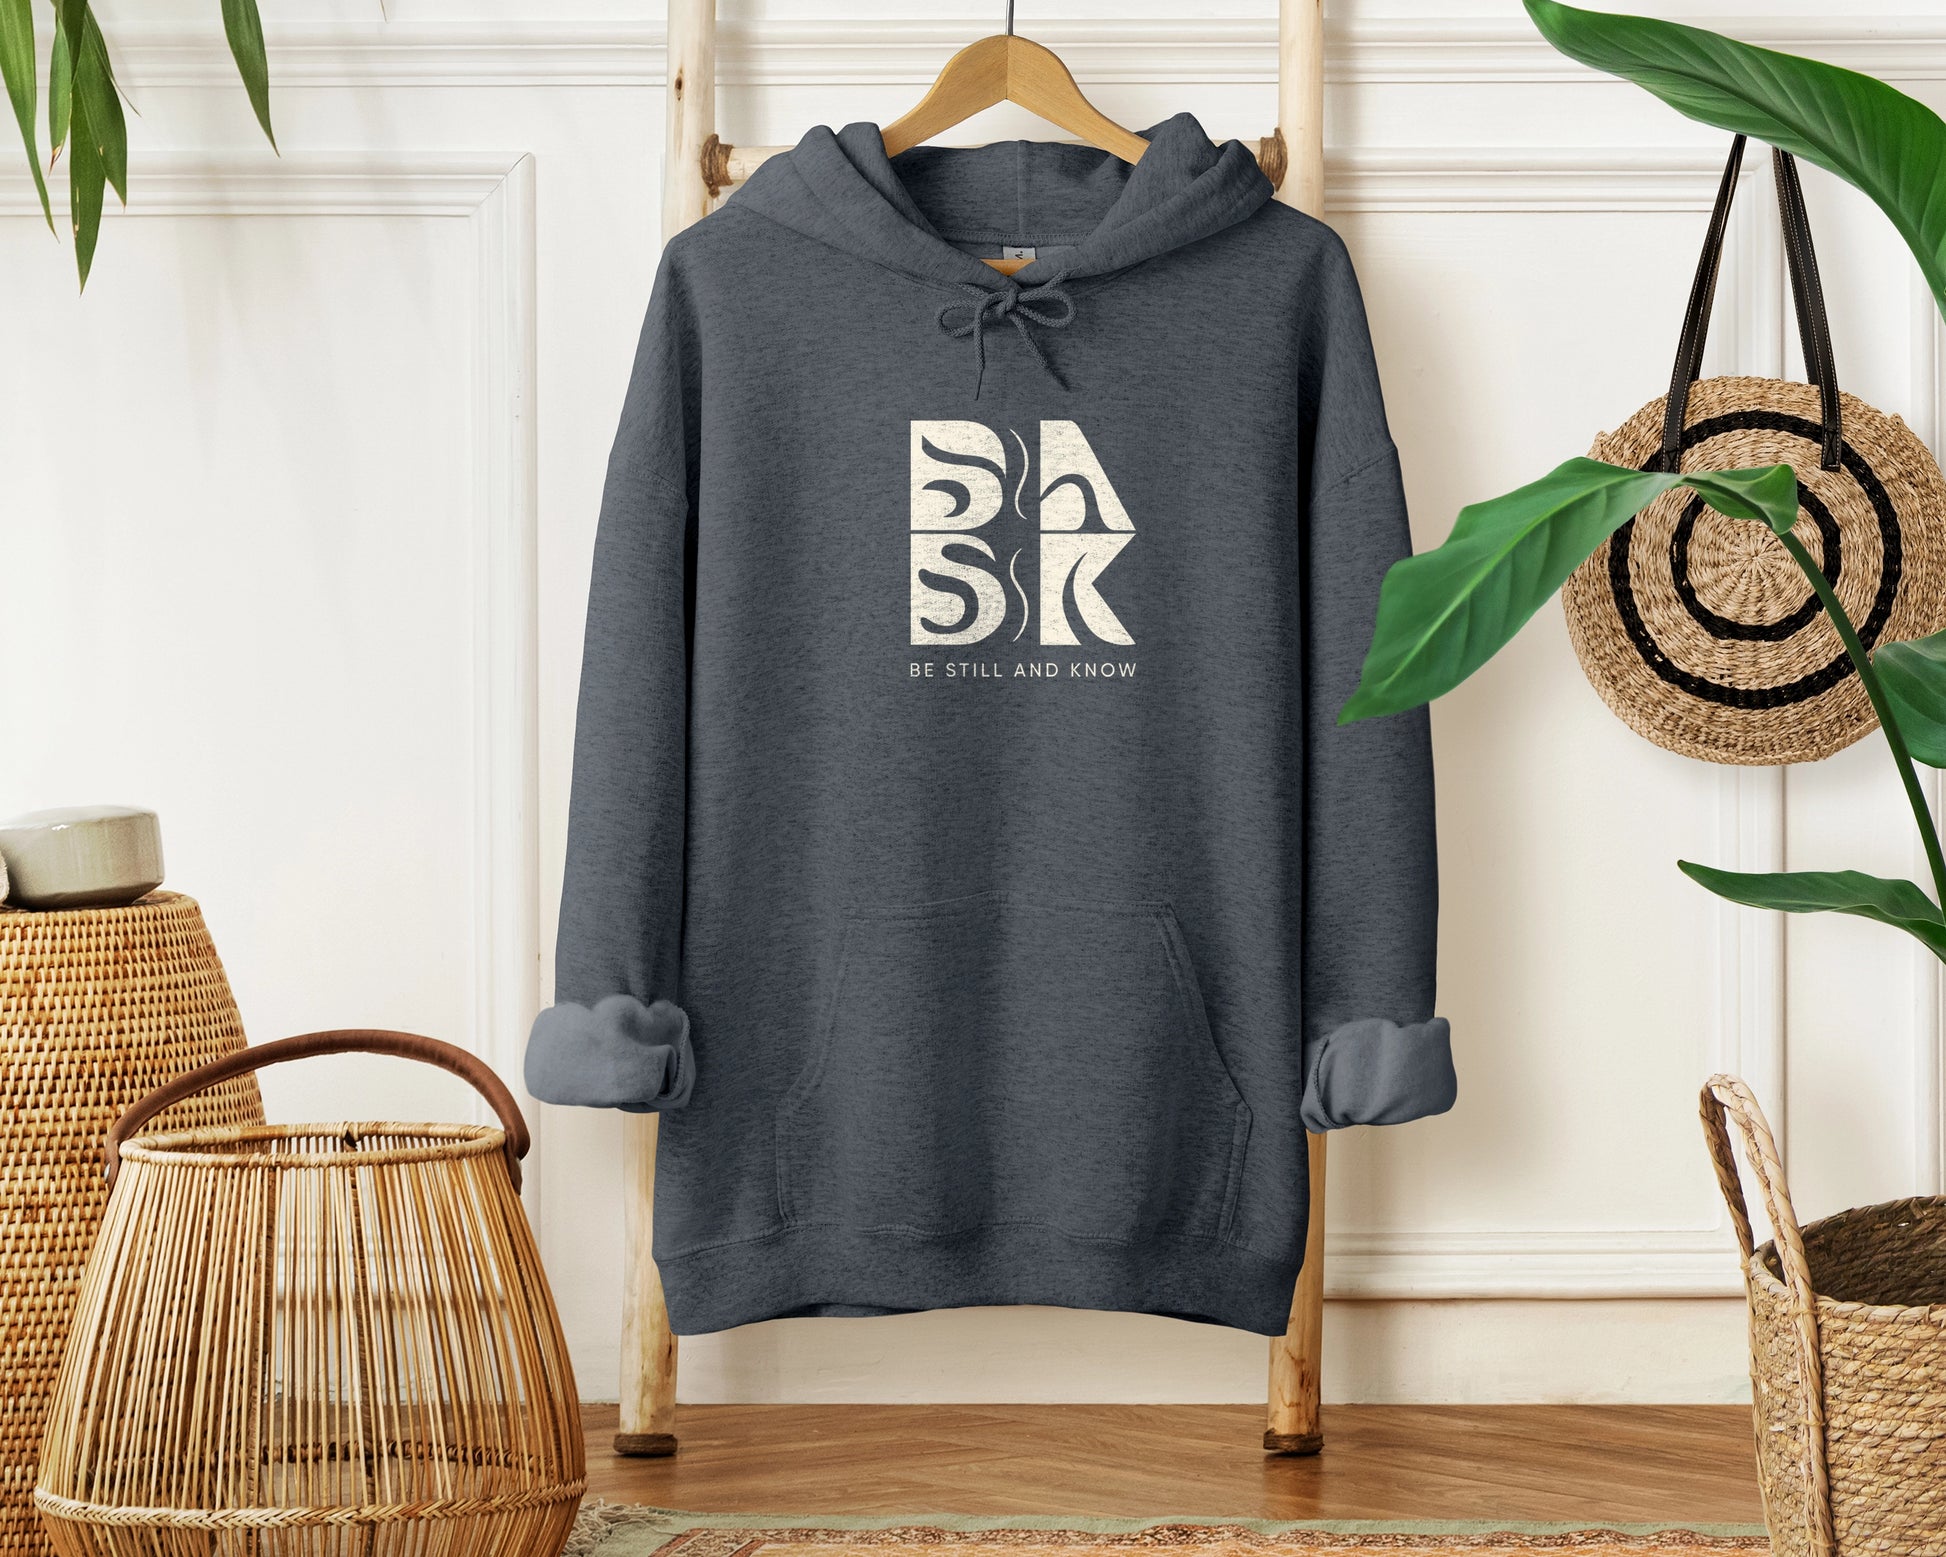 A "Blessed Beginnings Hoodie in Dark Heather" with the word "sark" on it, featuring the "Be Still and Know" logo.